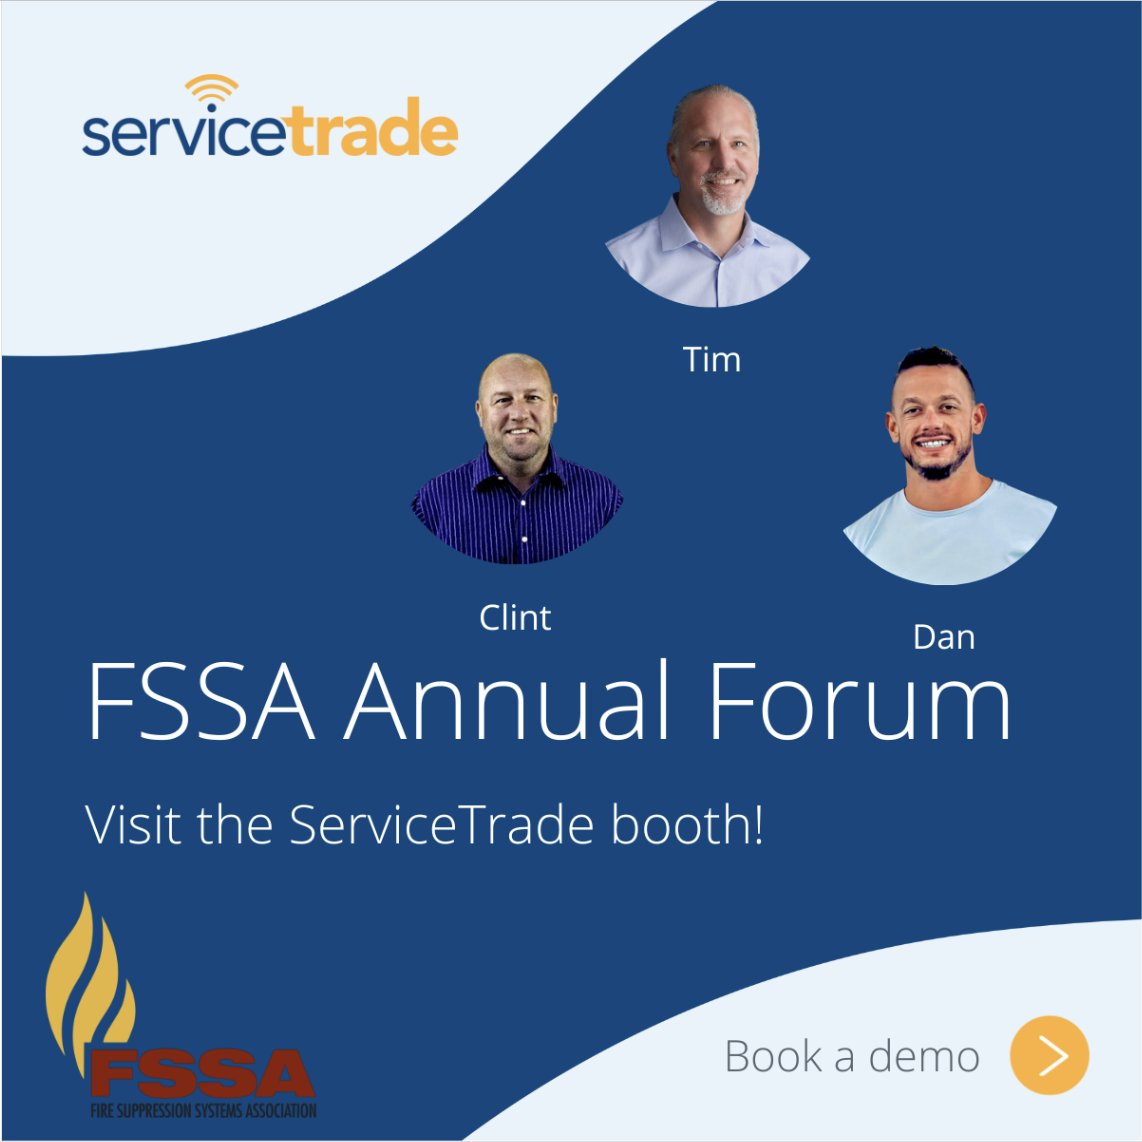 Over 1300 fire and mechanical contracting companies choose ServiceTrade to optimize limited technician resources. Stop by our booth at #FSSA this week to see why.

fssa.net/2024-annual-fo…

#fireinspection #fireprotection #FireSafety #FireProtectionServices #FireSystem